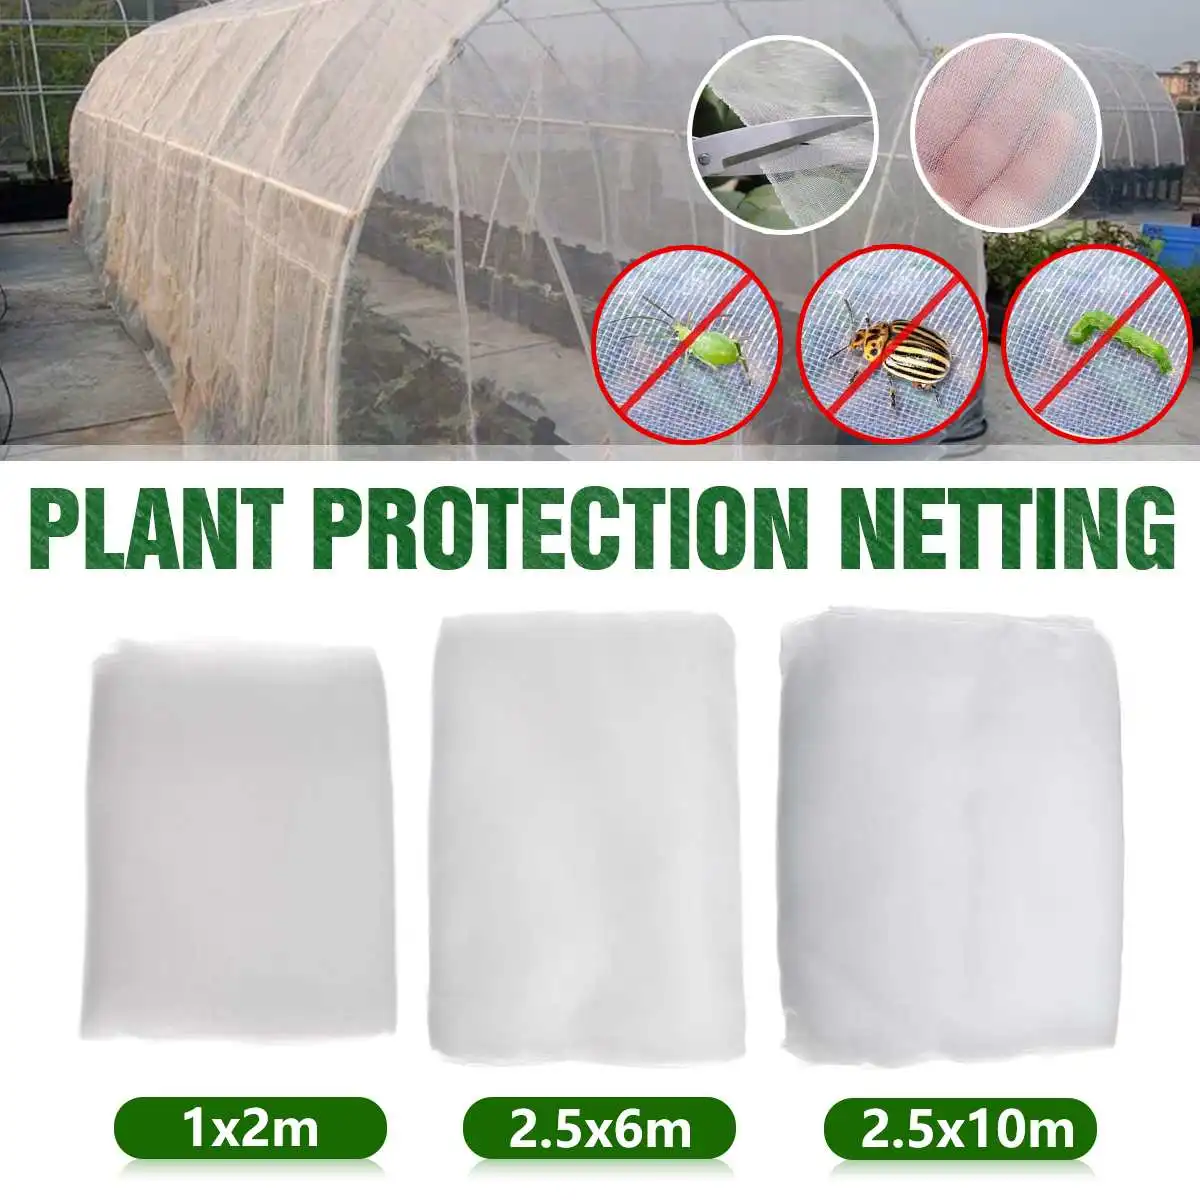 Garden Bug Netting Plant Cover for Protect Plant Fruits Flower from Insect Bird Eating Alpurple Insect Bird Barrier Netting Mesh with Drawstring Large 2 PCS 